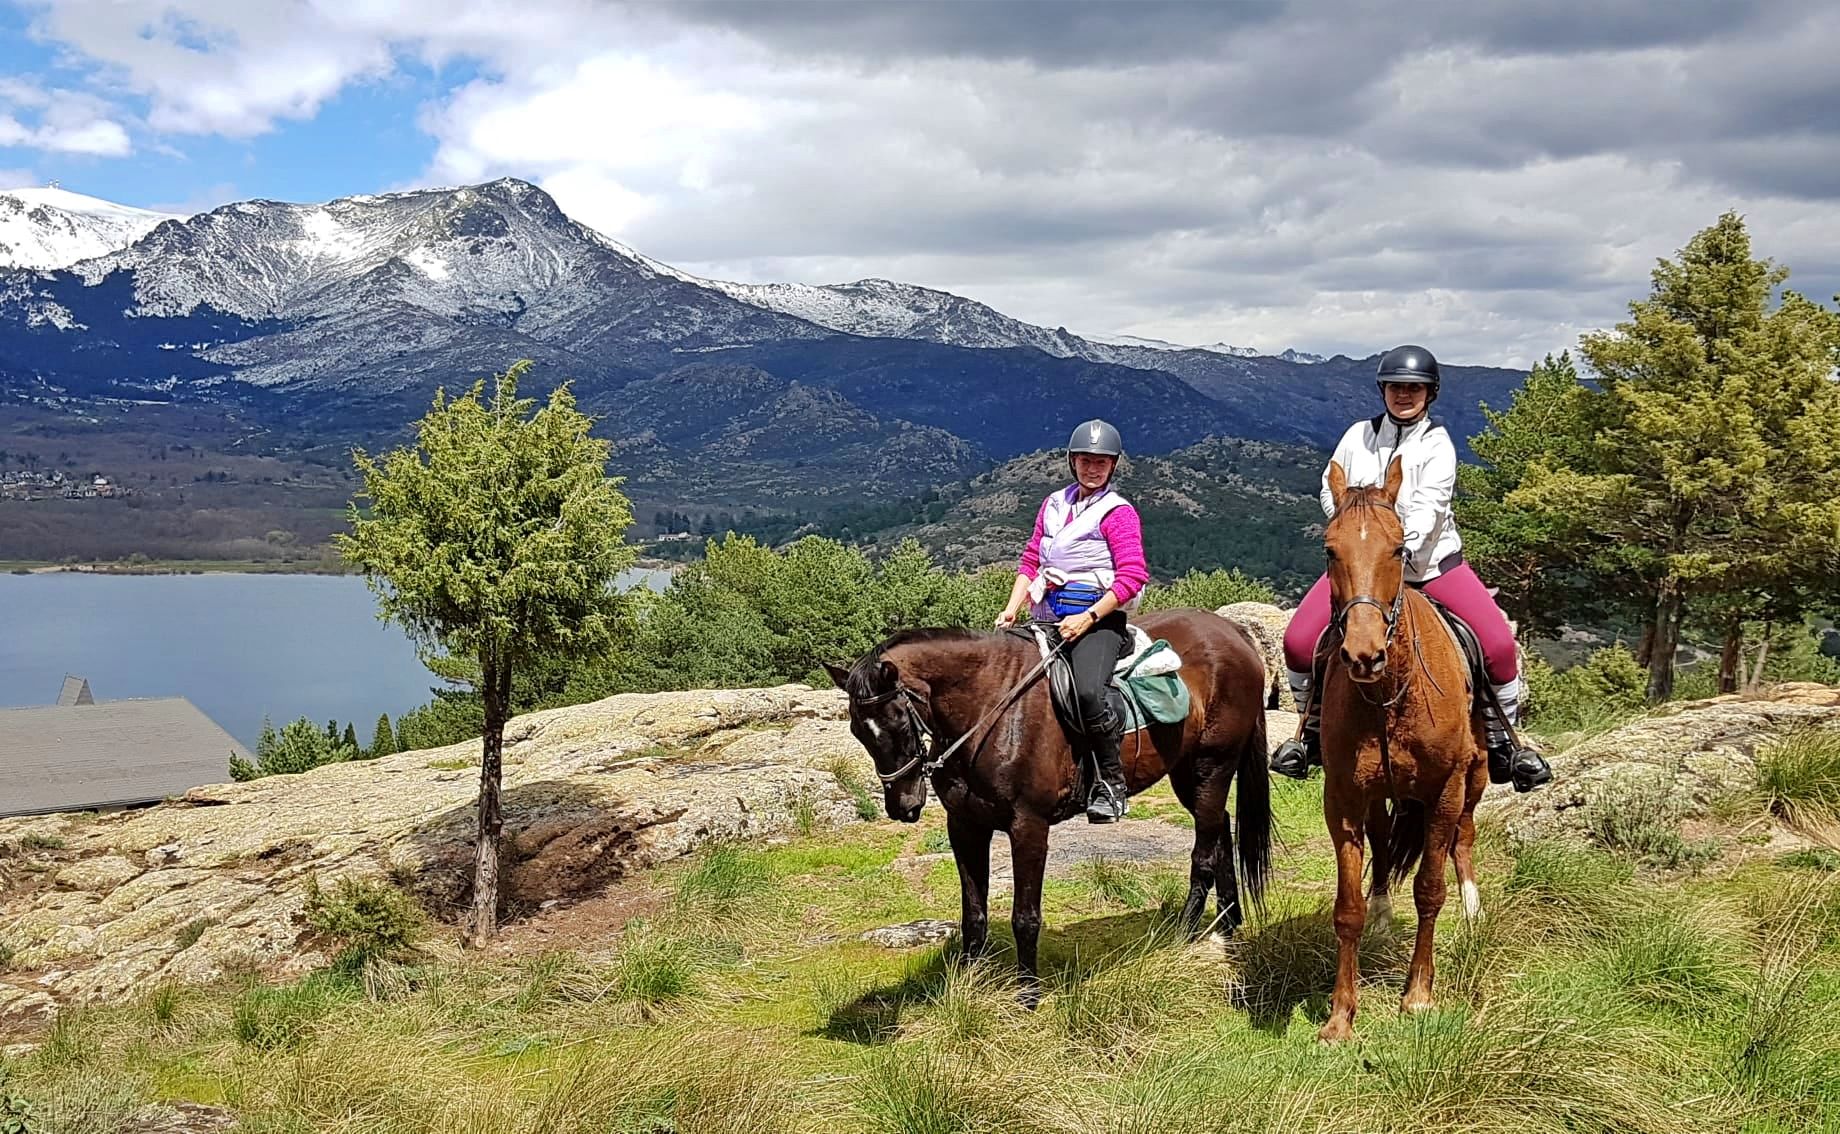 Equestrian tourism is more than horseback riding